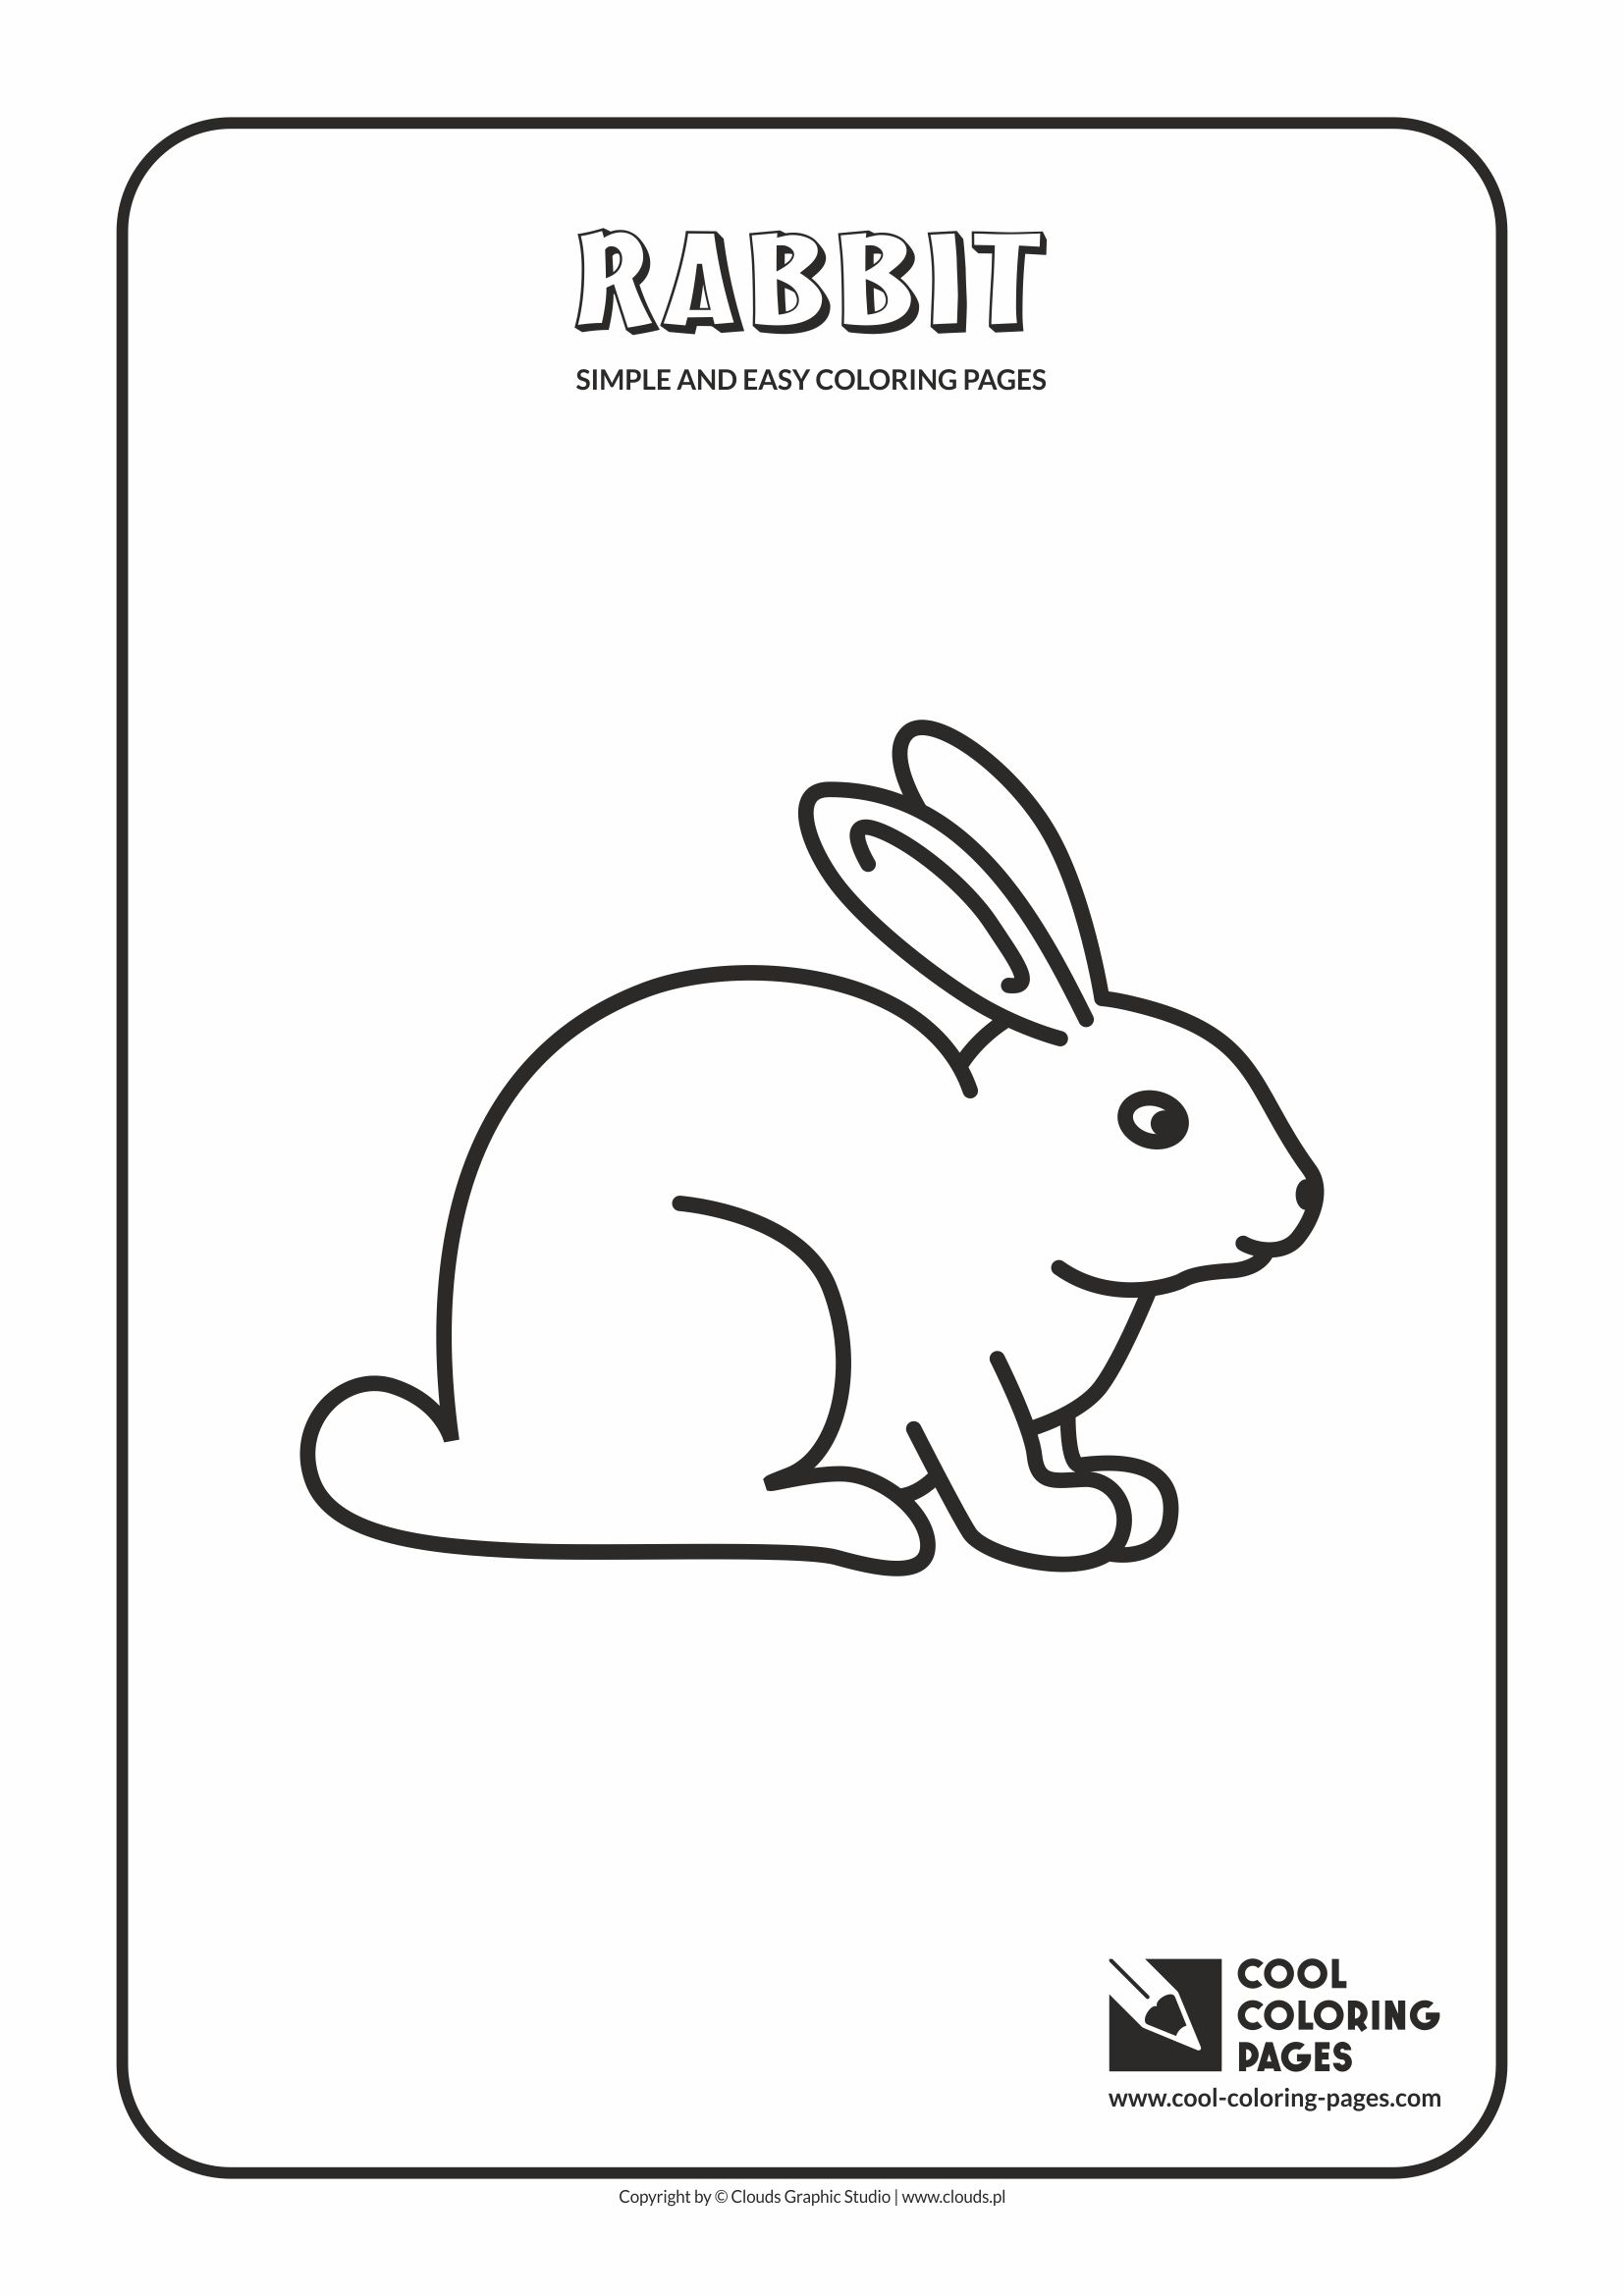 Simple and easy coloring pages for toddlers - Rabbit